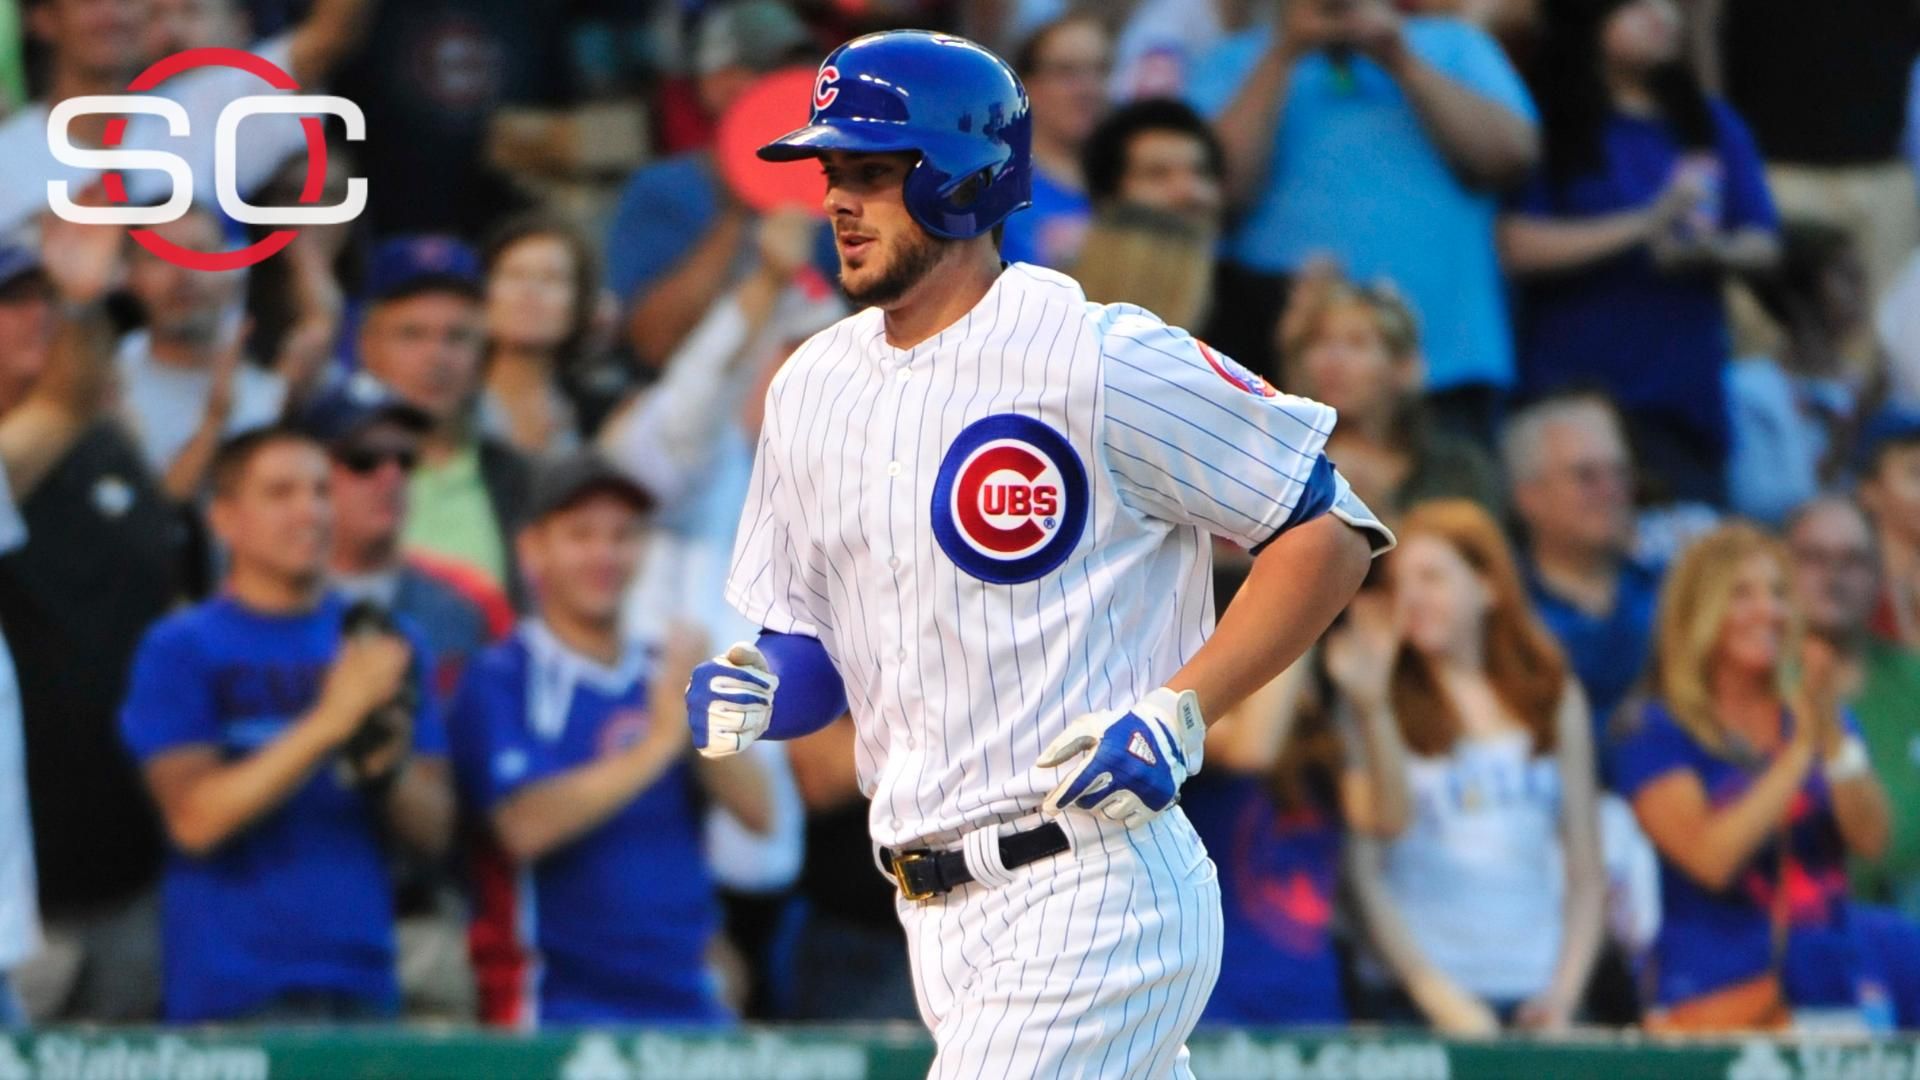 Price of winning: Cubs' Kris Bryant has top-selling MLB jersey - ABC7  Chicago